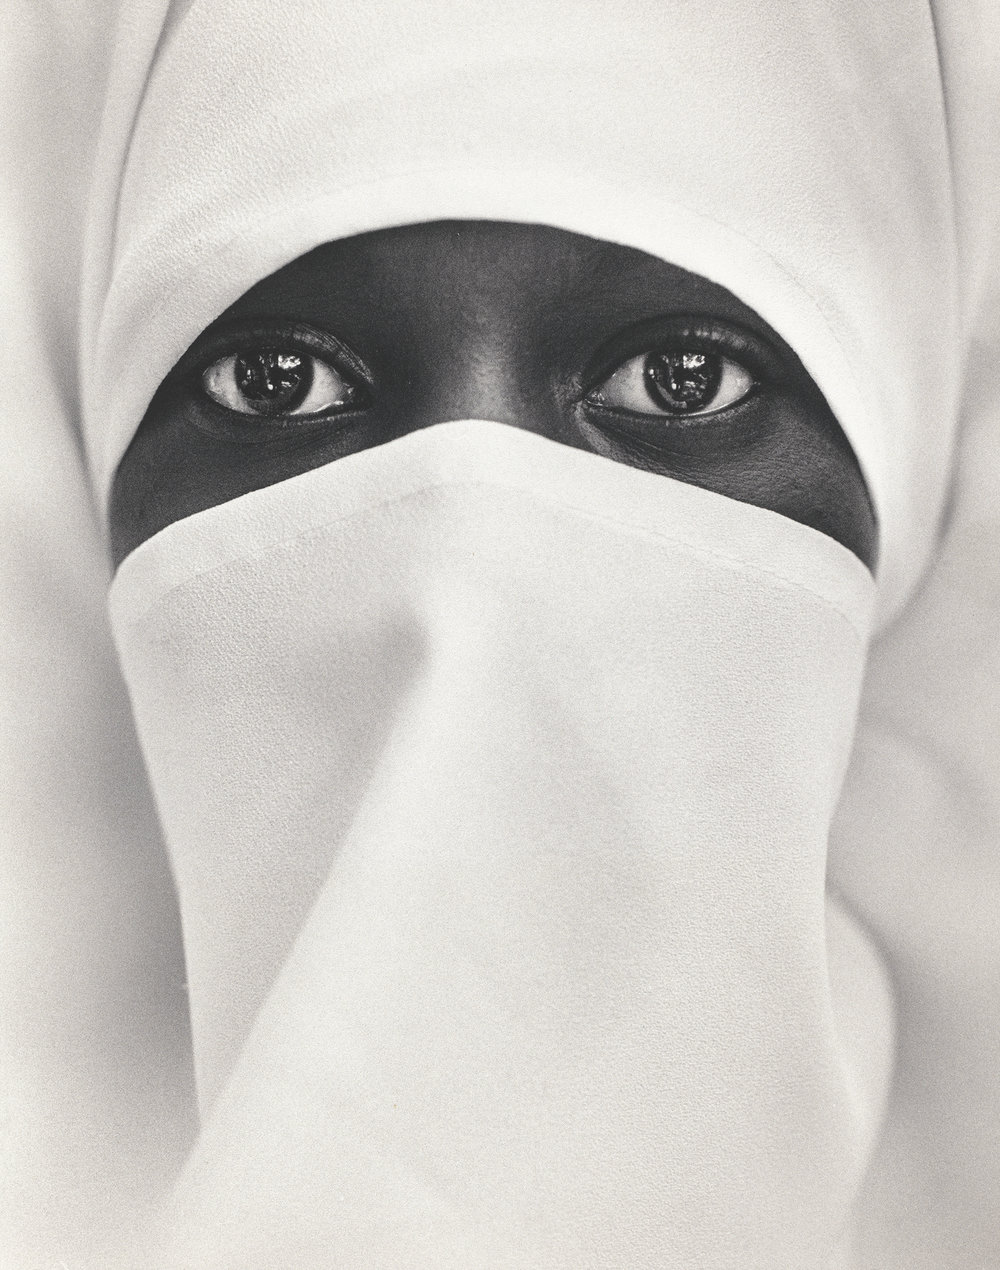   Chester Higgins,&nbsp;  New York City, A young Moslem woman in Brooklyn , 1990  Gelatin silver print,&nbsp;10” × 7 15/16”W&nbsp;  Collection of the Artist. Courtesy Virginia Museum of Fine Arts, Richmond 